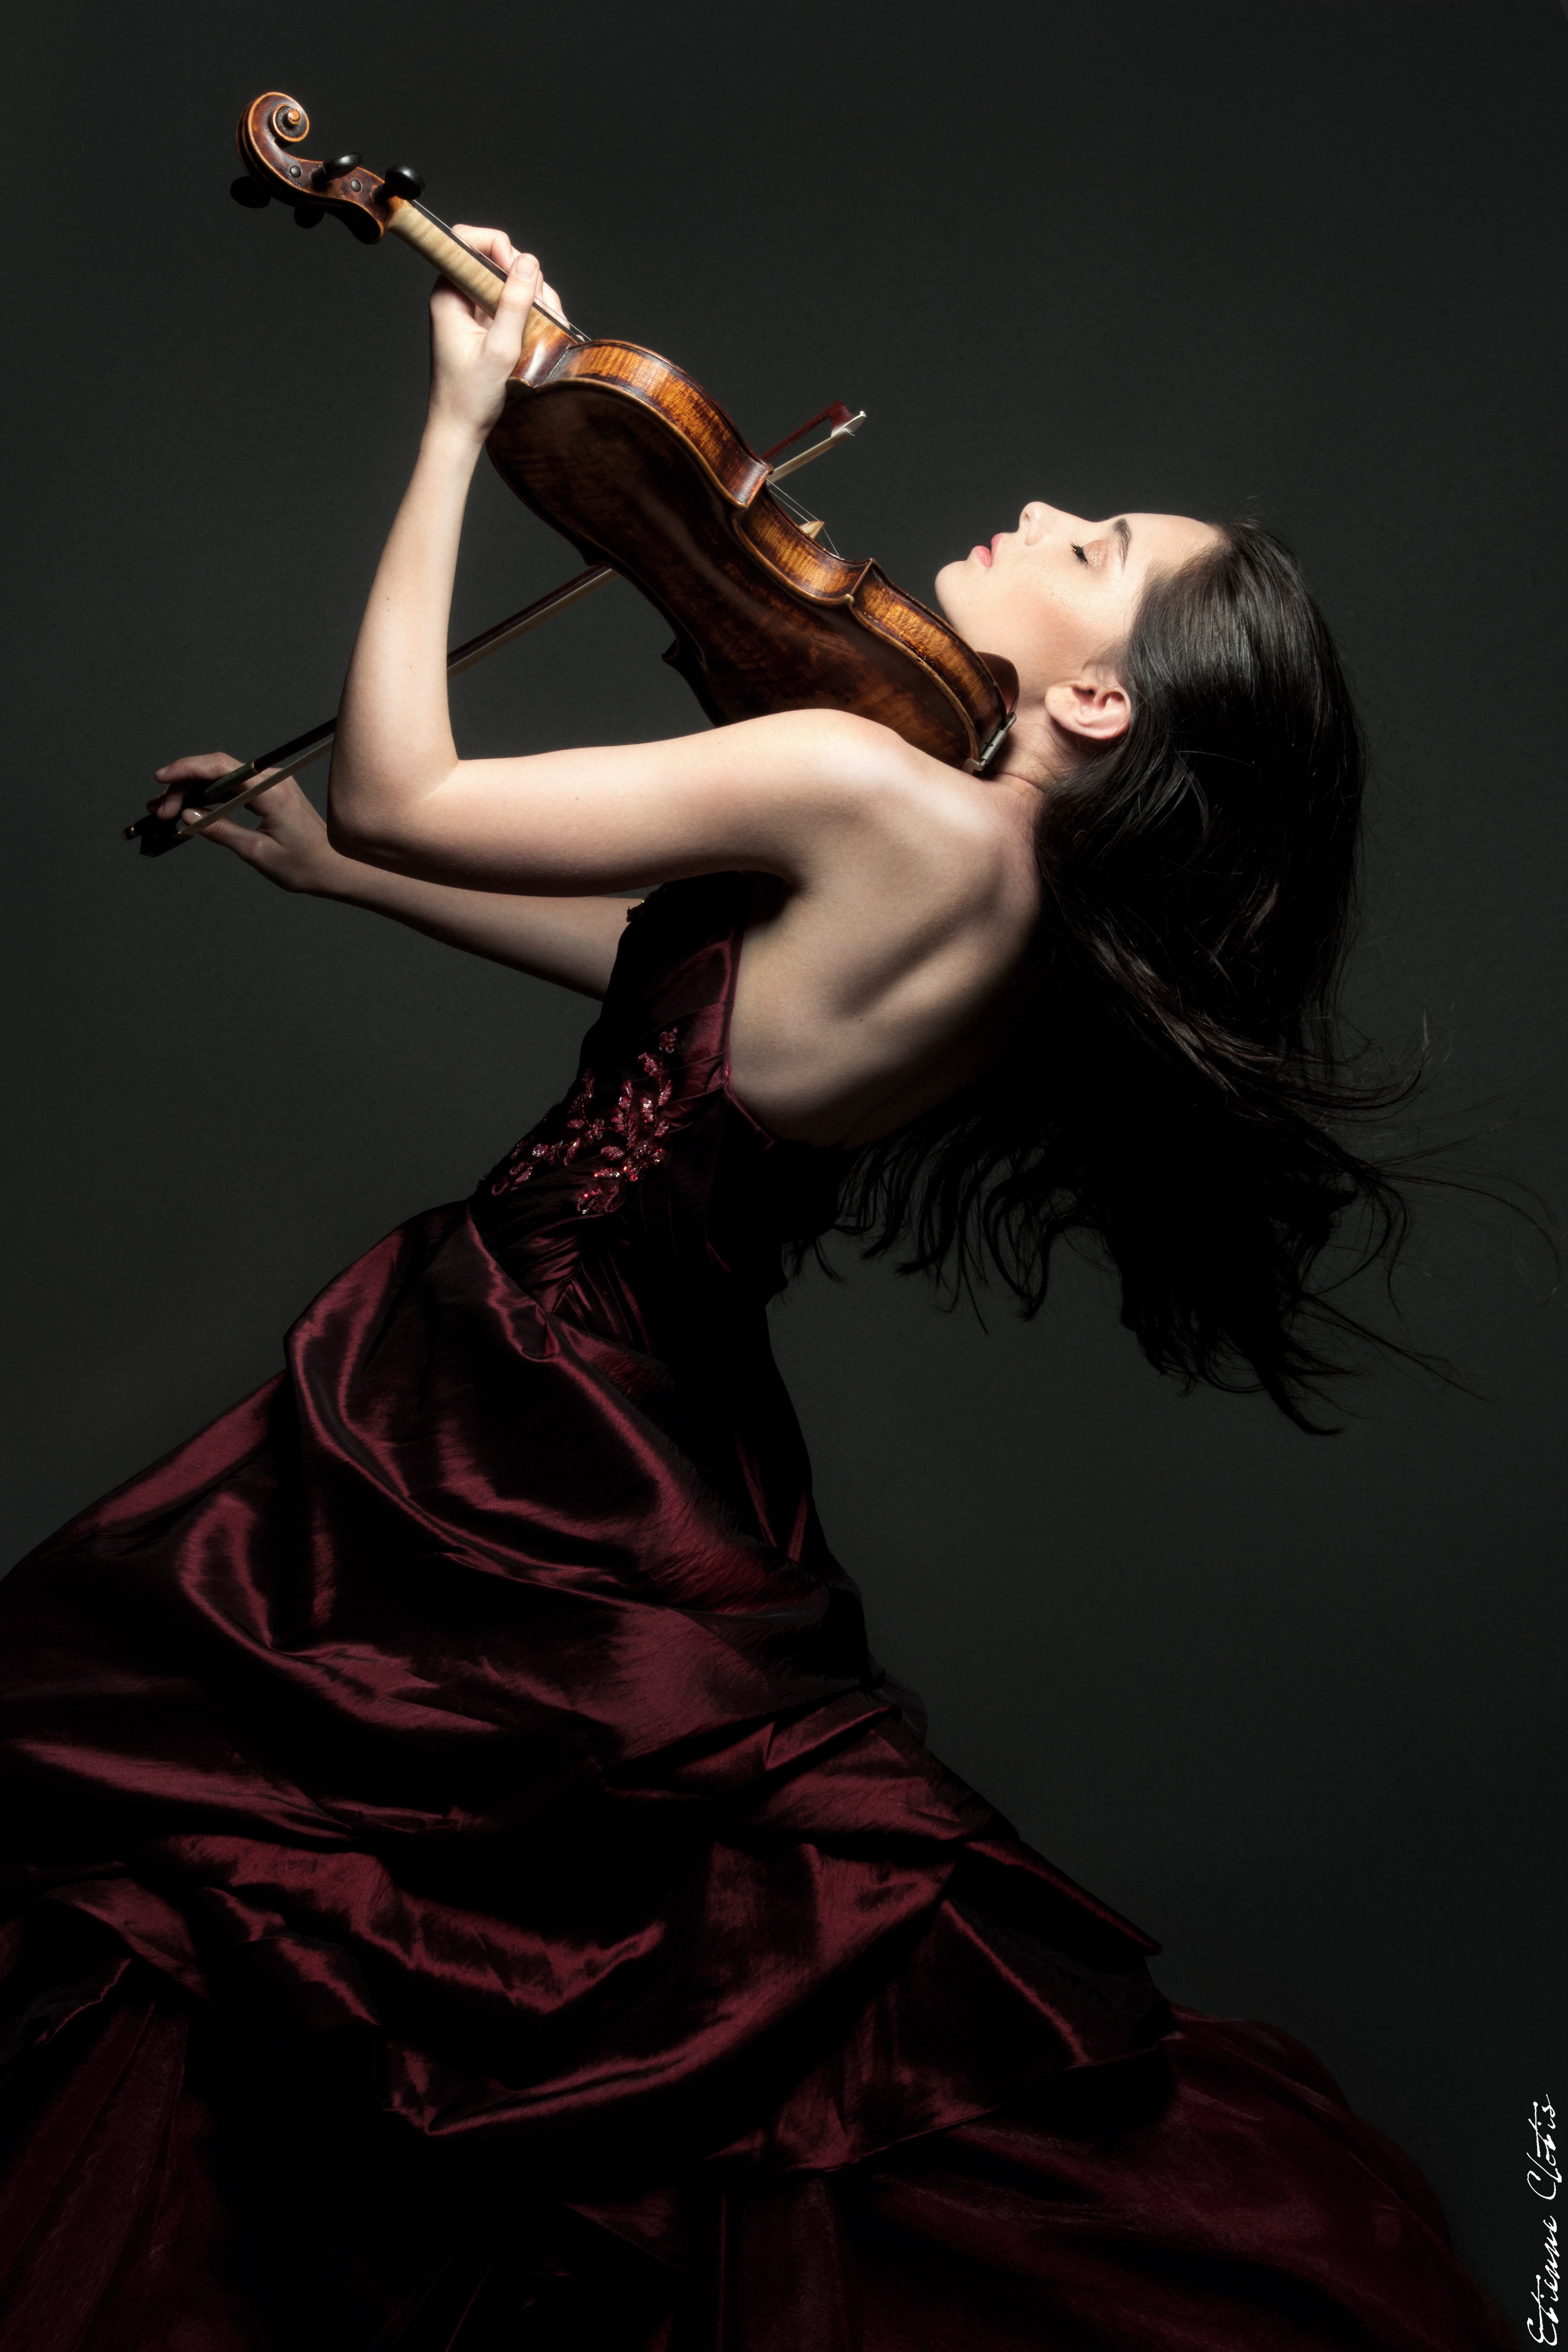 Concert Violinist Esther Abrami in "The Promise"